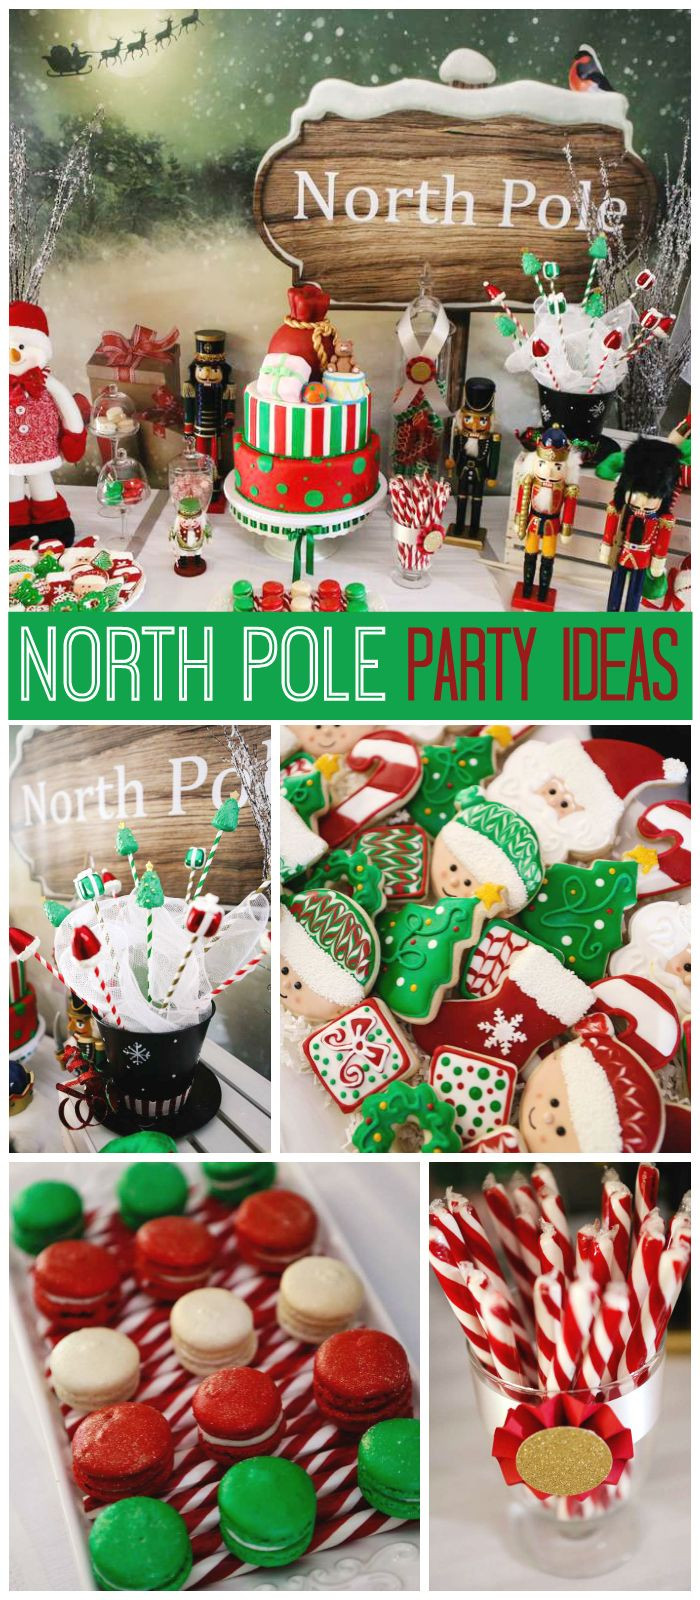 Christmas Holiday Party Ideas
 25 best ideas about Christmas Party Themes on Pinterest